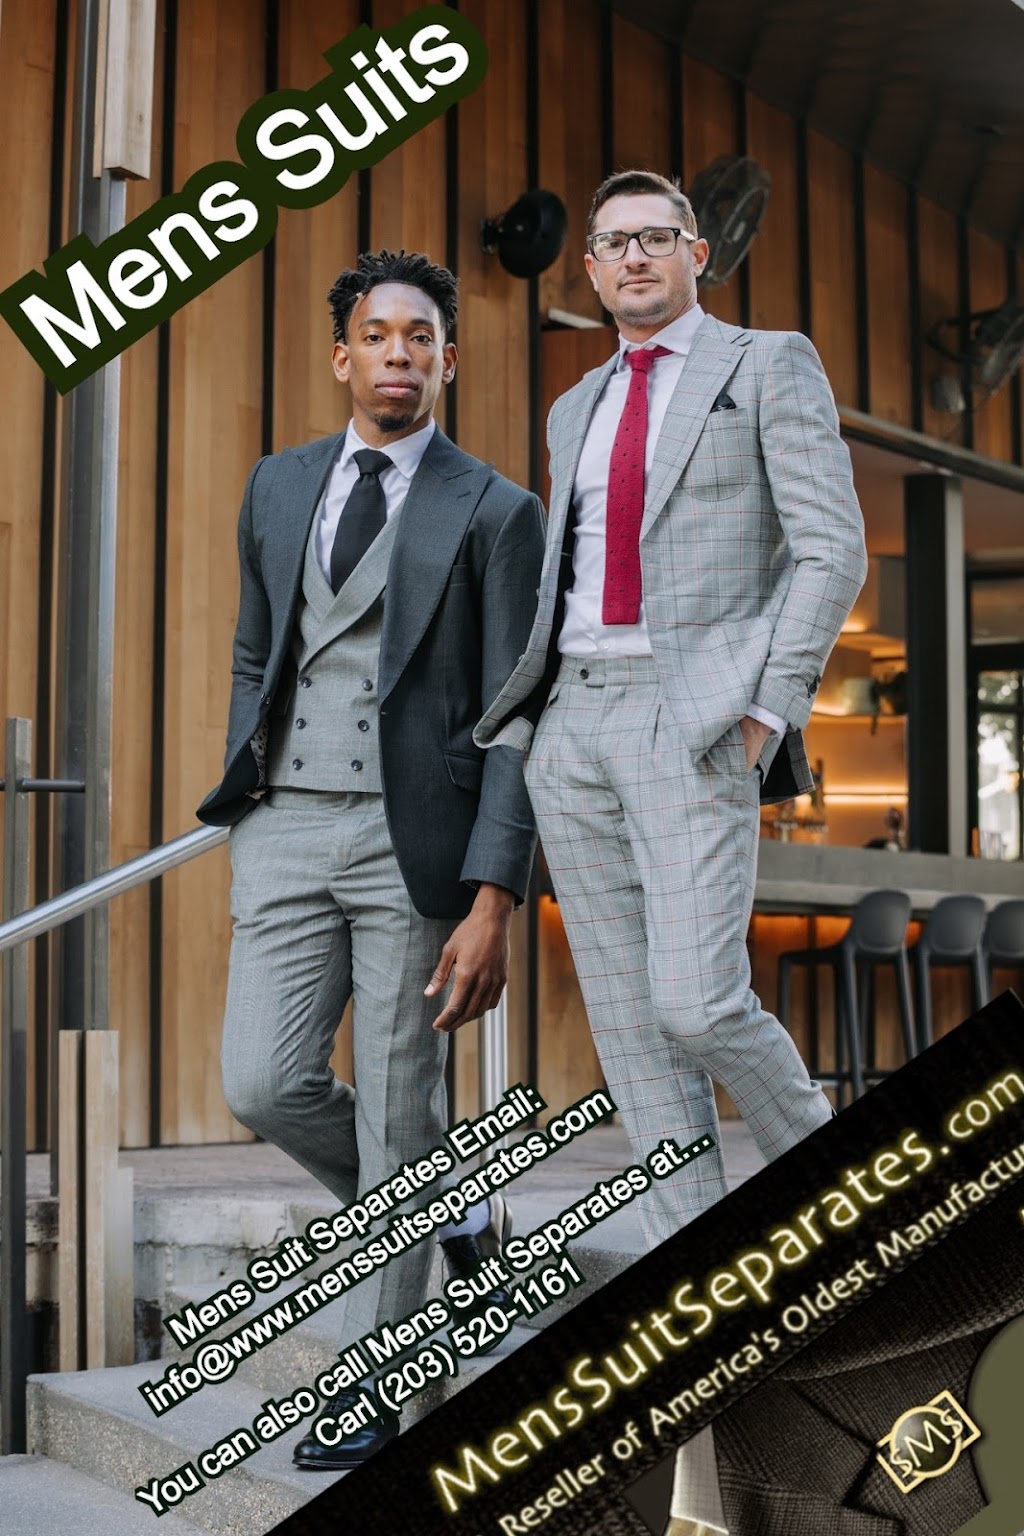 Mens Suits Separates: Discount Suits/Blazers Made In the USA | 64 Trail St, Fairfield, CT 06825 | Phone: (203) 520-1161